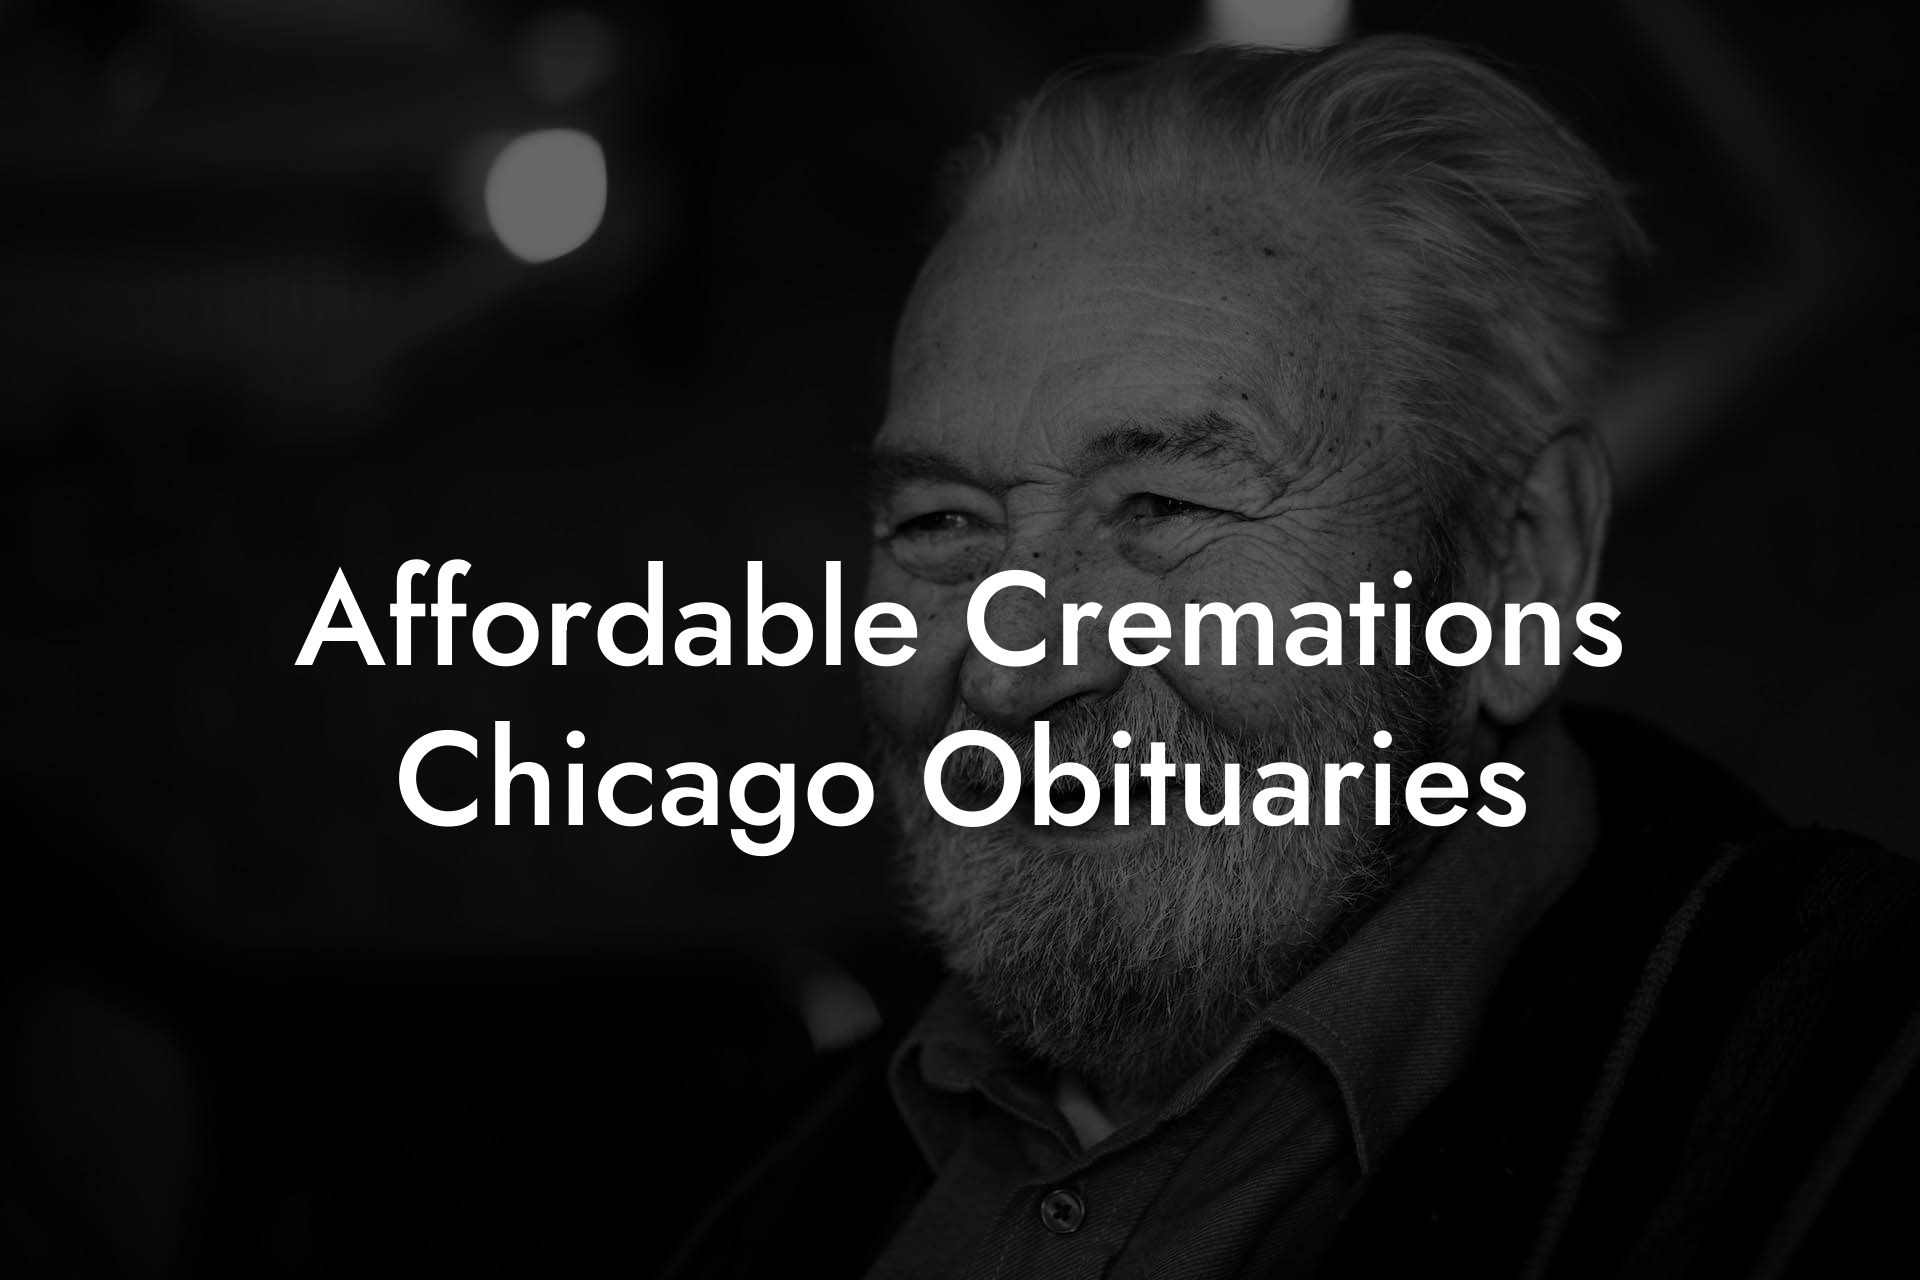 Affordable Cremations Chicago Obituaries